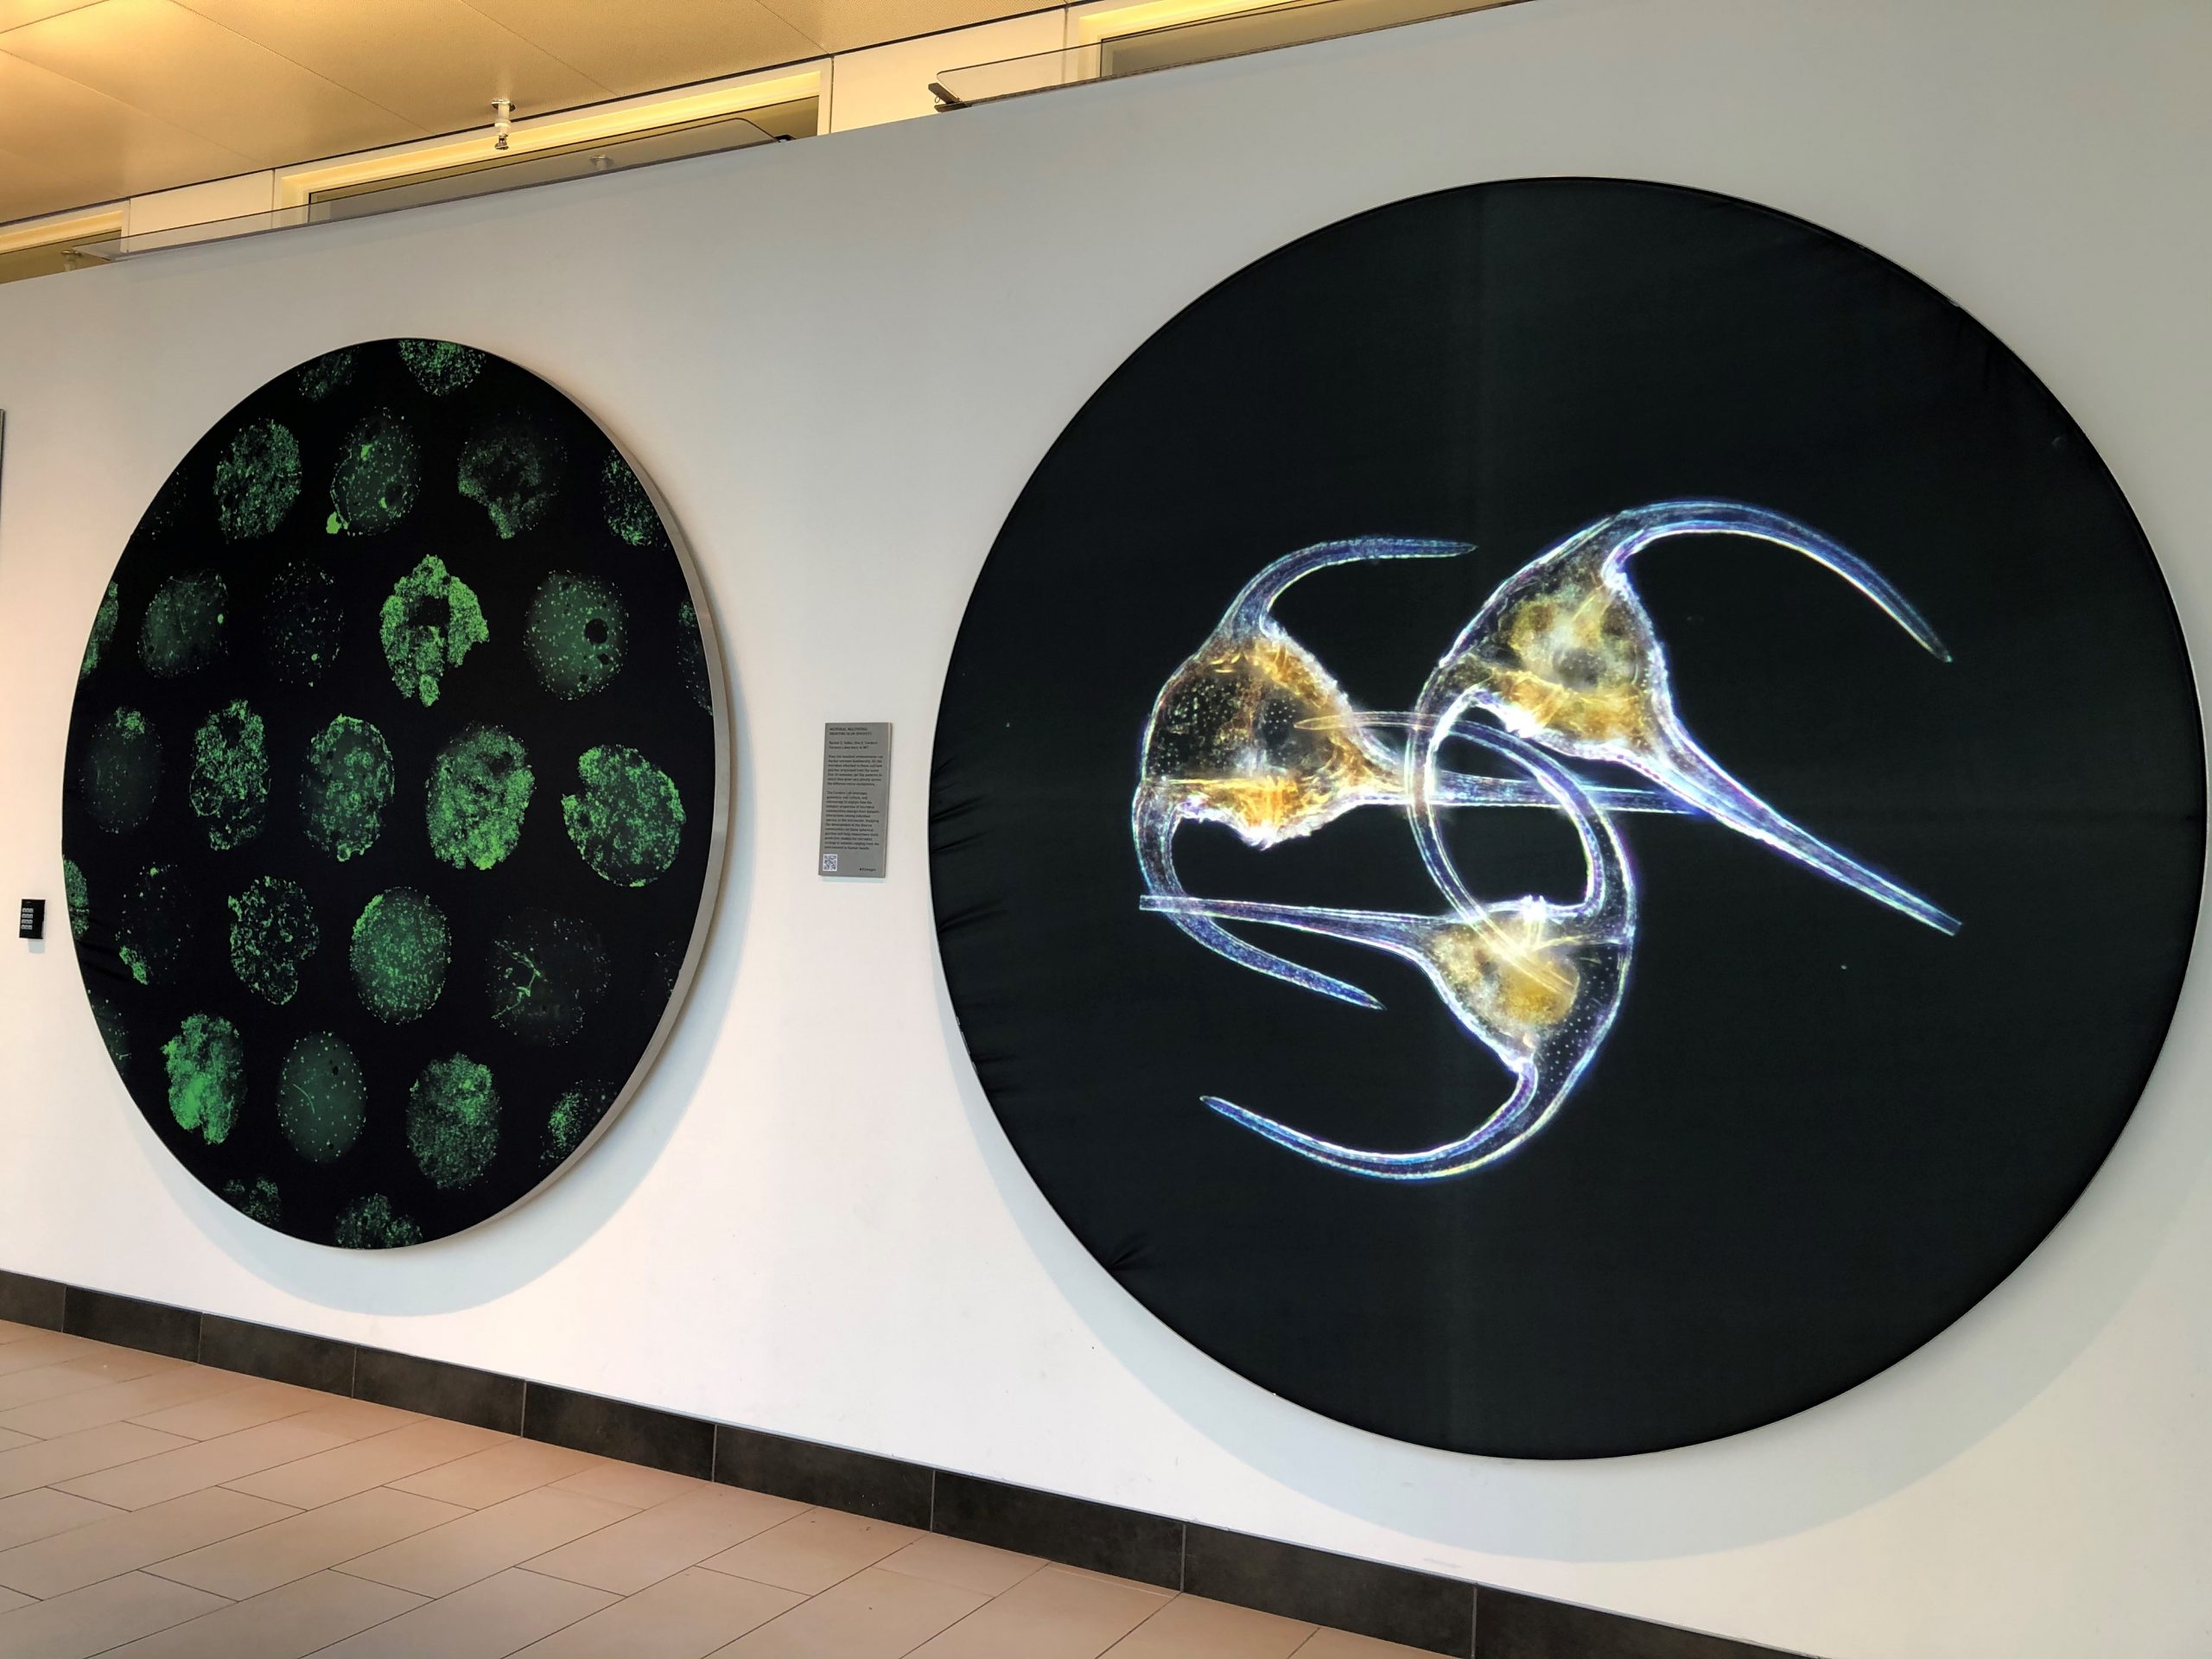 Two circular wall displays of microorganisms, one with three dinoflagellates, on display, winners of 2020 Koch Institute Image Awards